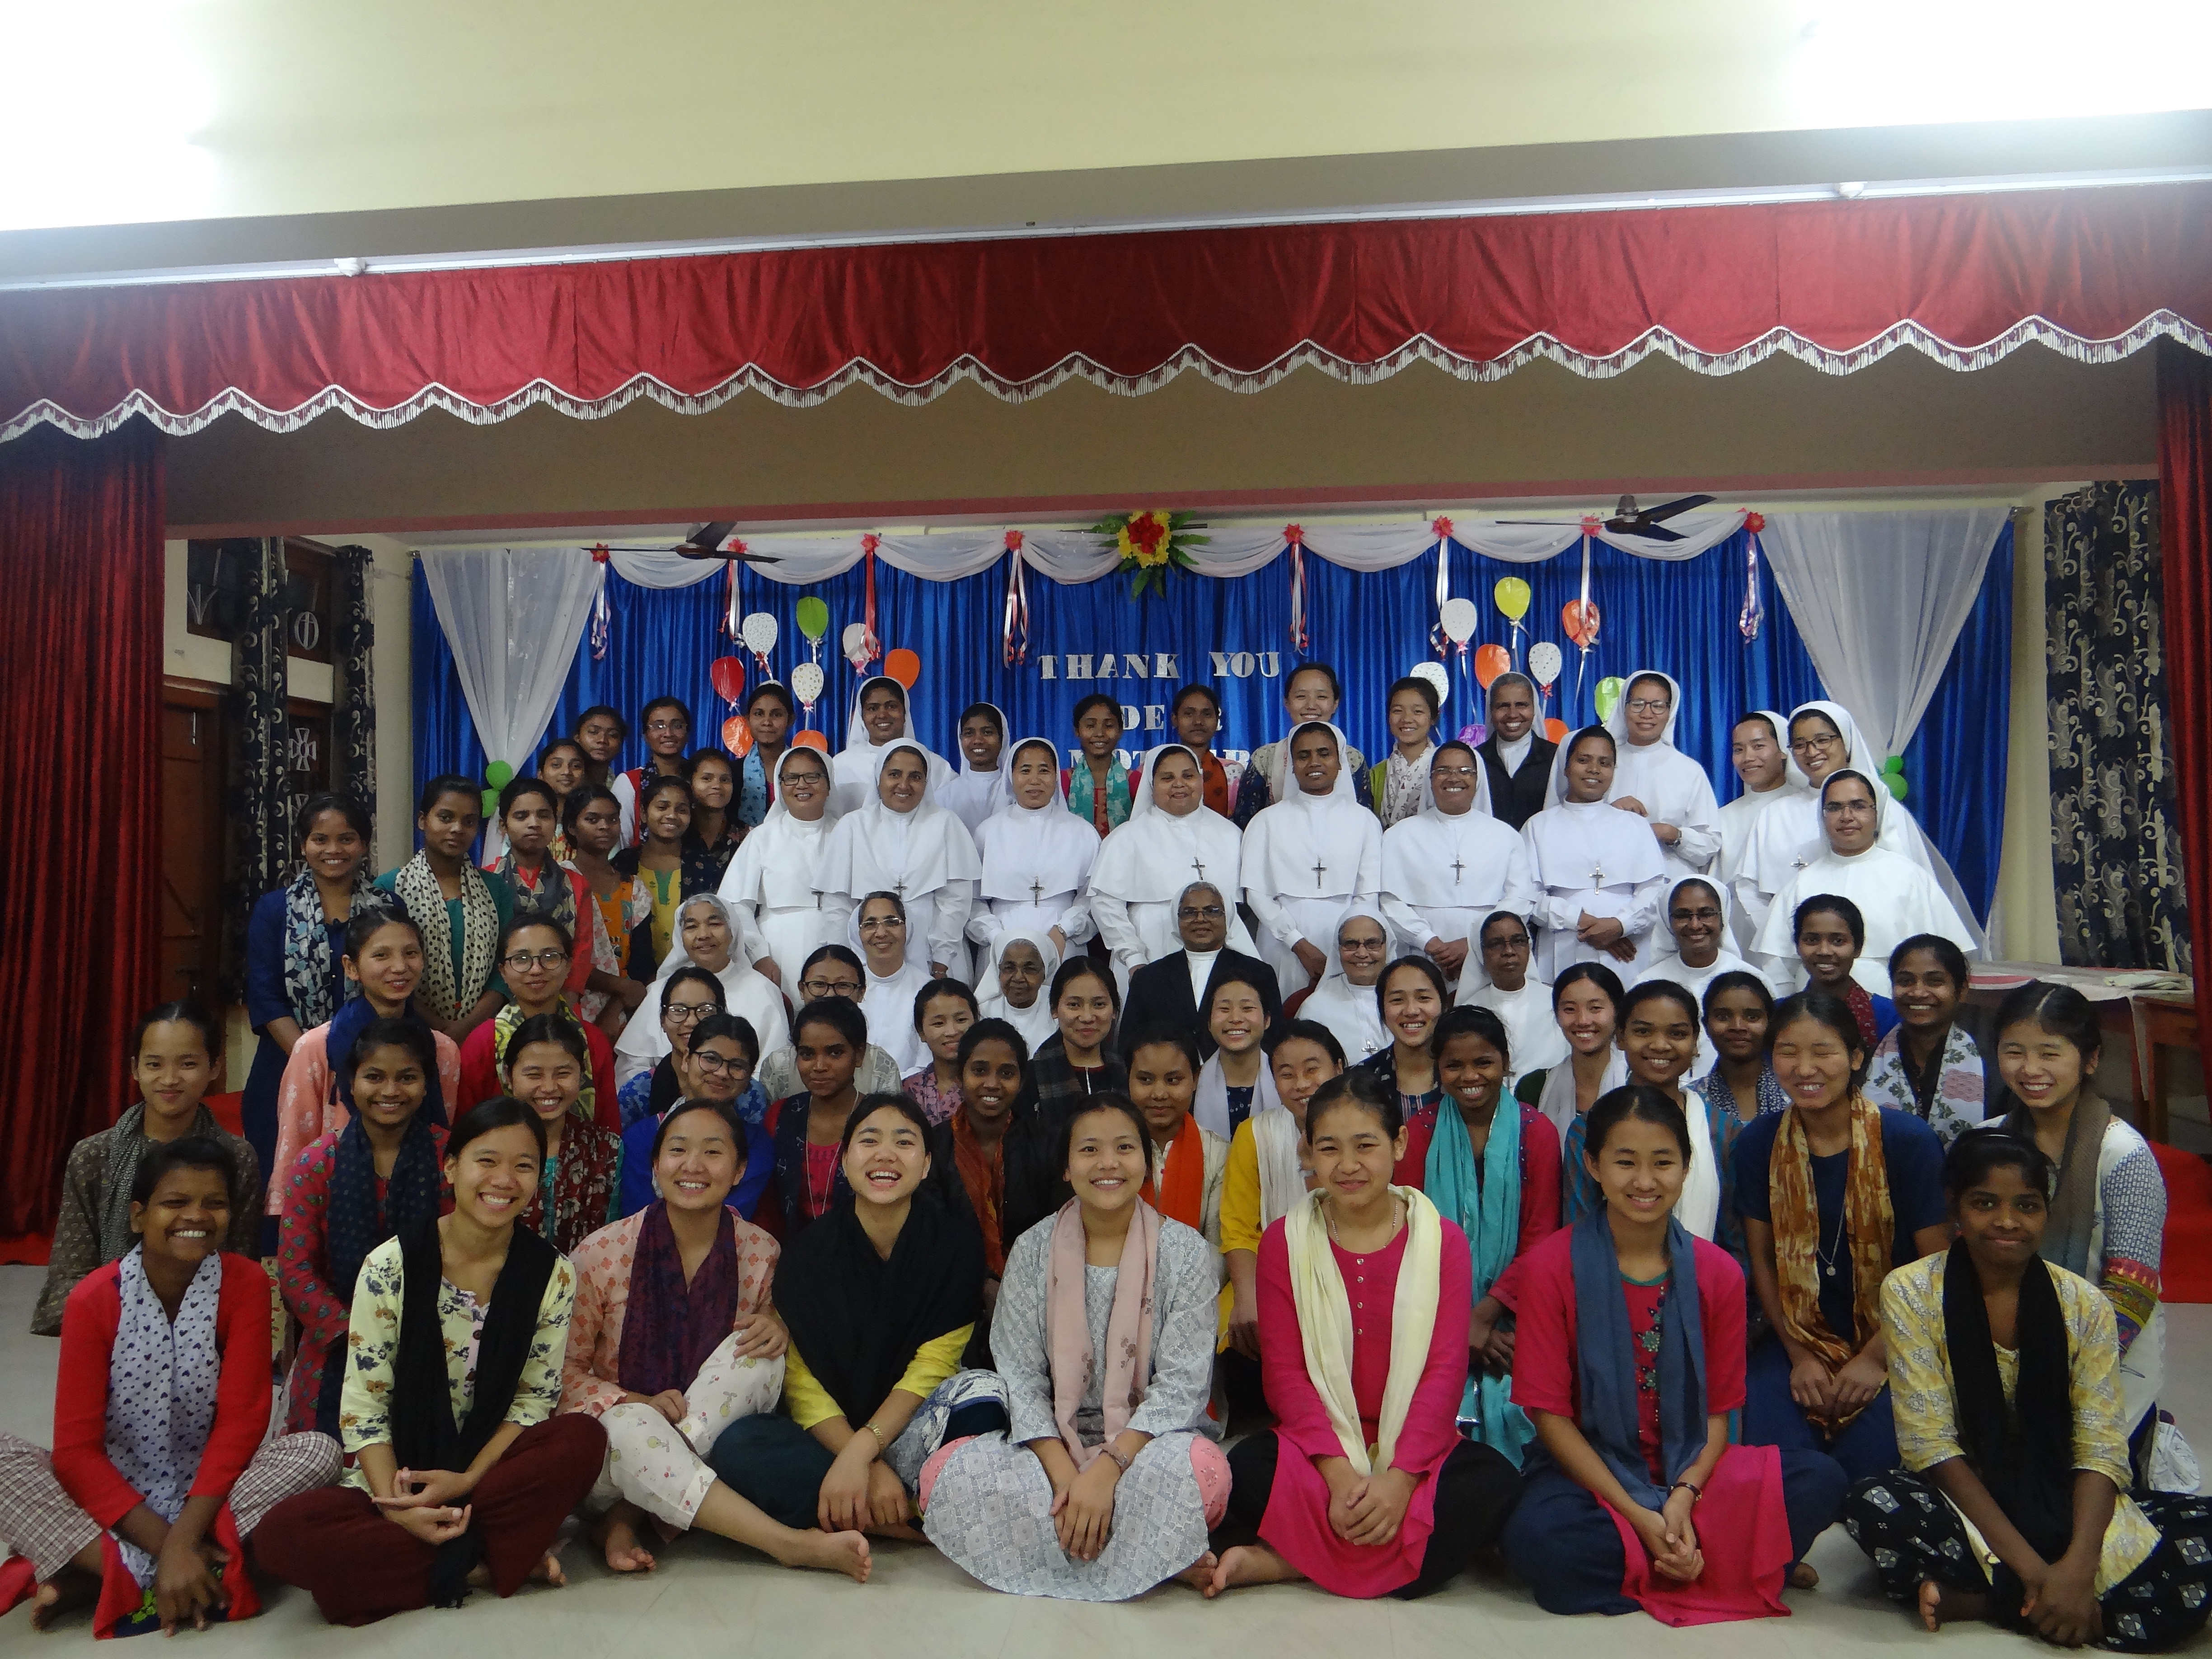 Superior General with the sisters and Candidates of Tinsukia Province